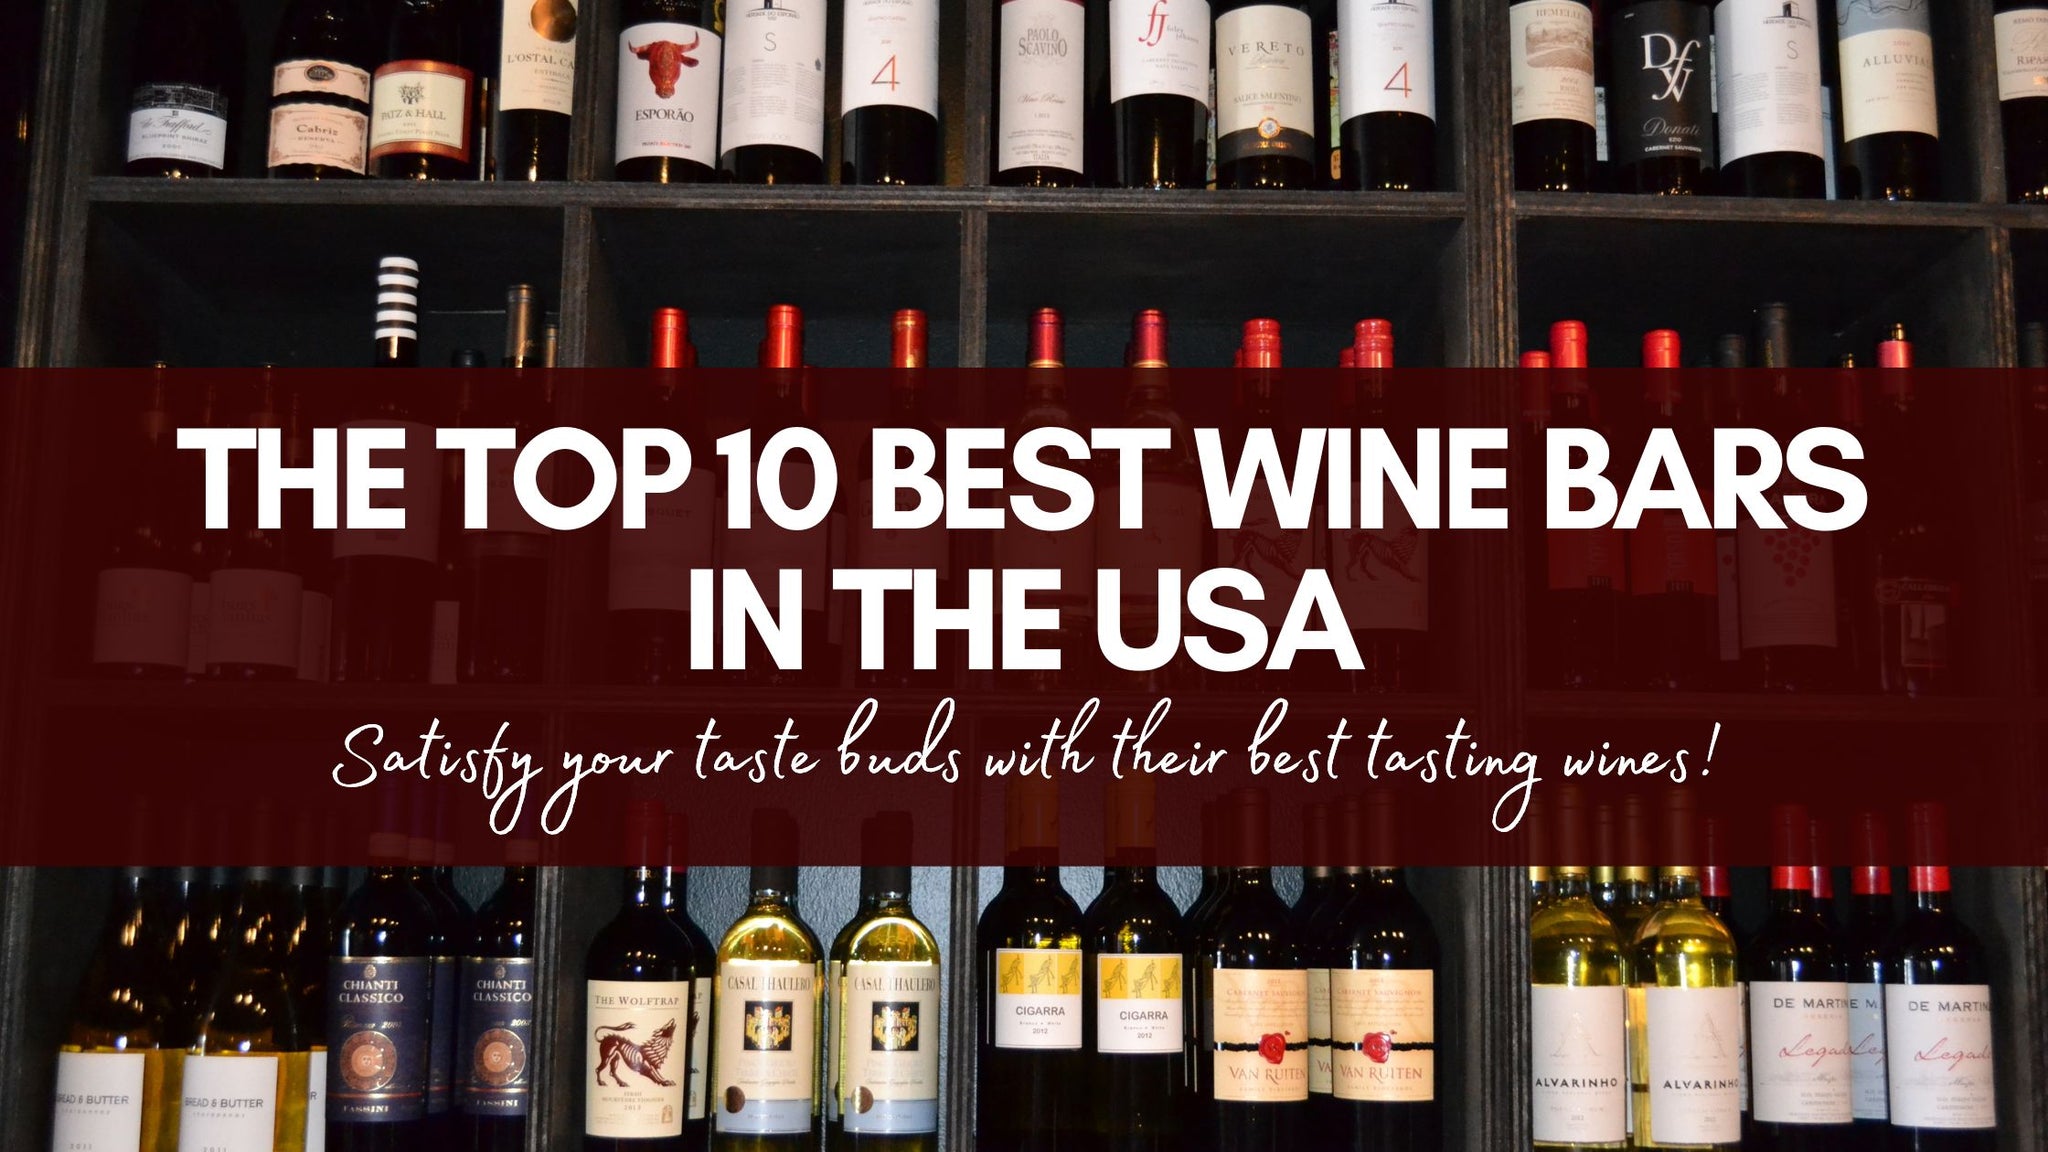 The Top 10 Wine Bars in the USA